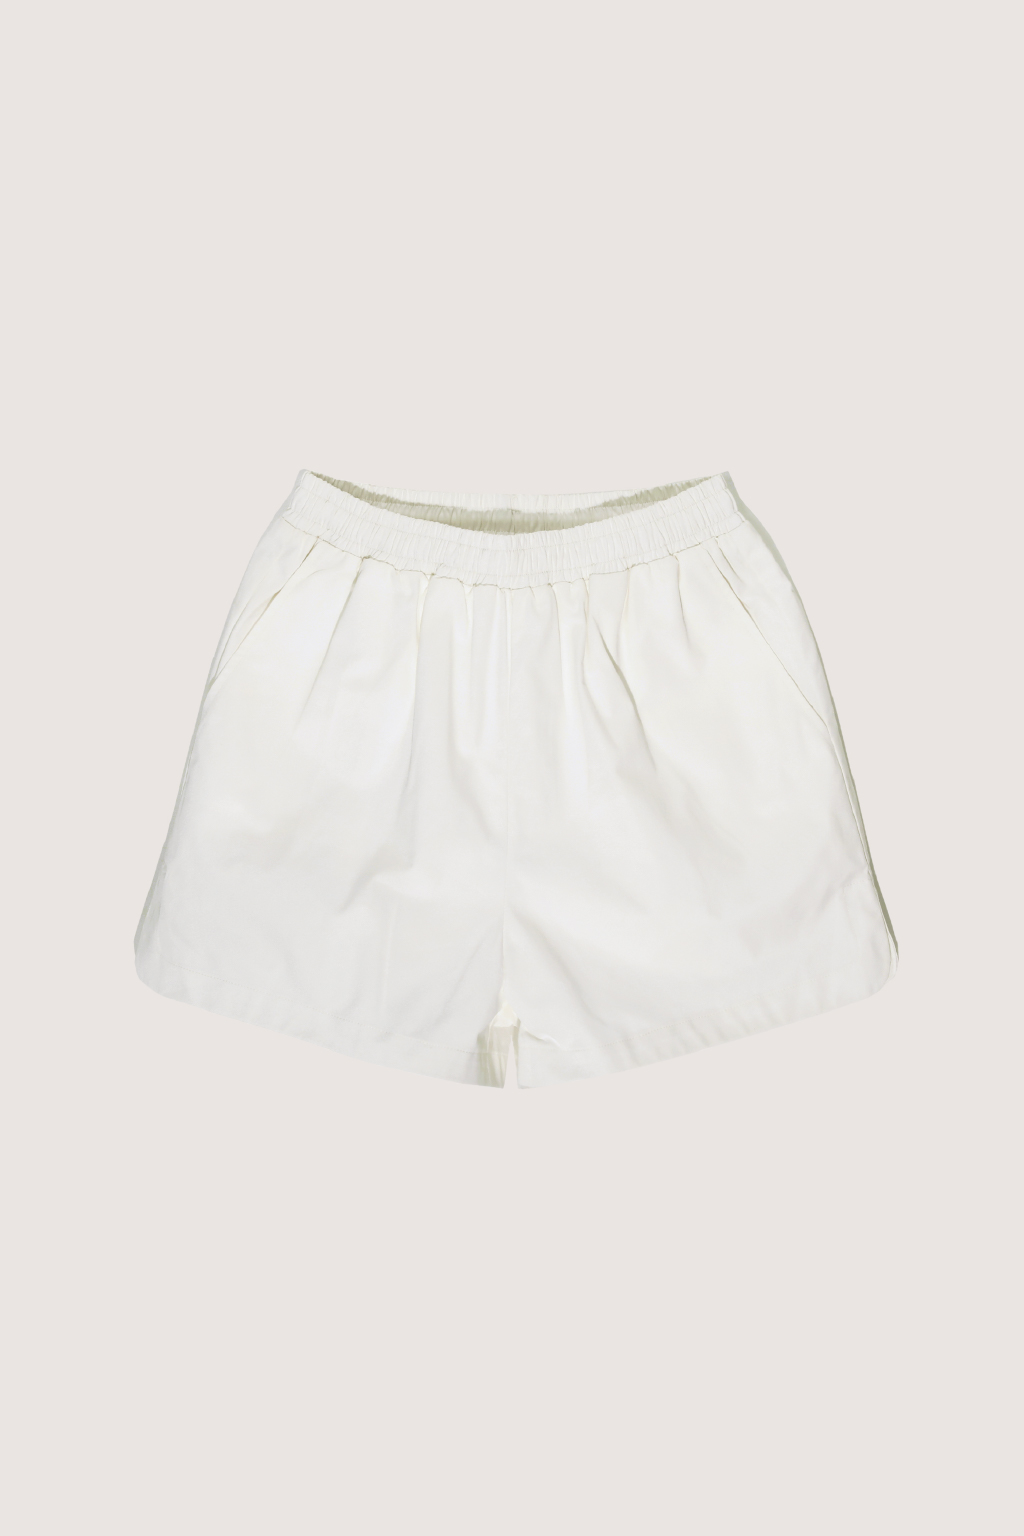 ESSENTIAL COTTON SHORTS [OFF WHITE]